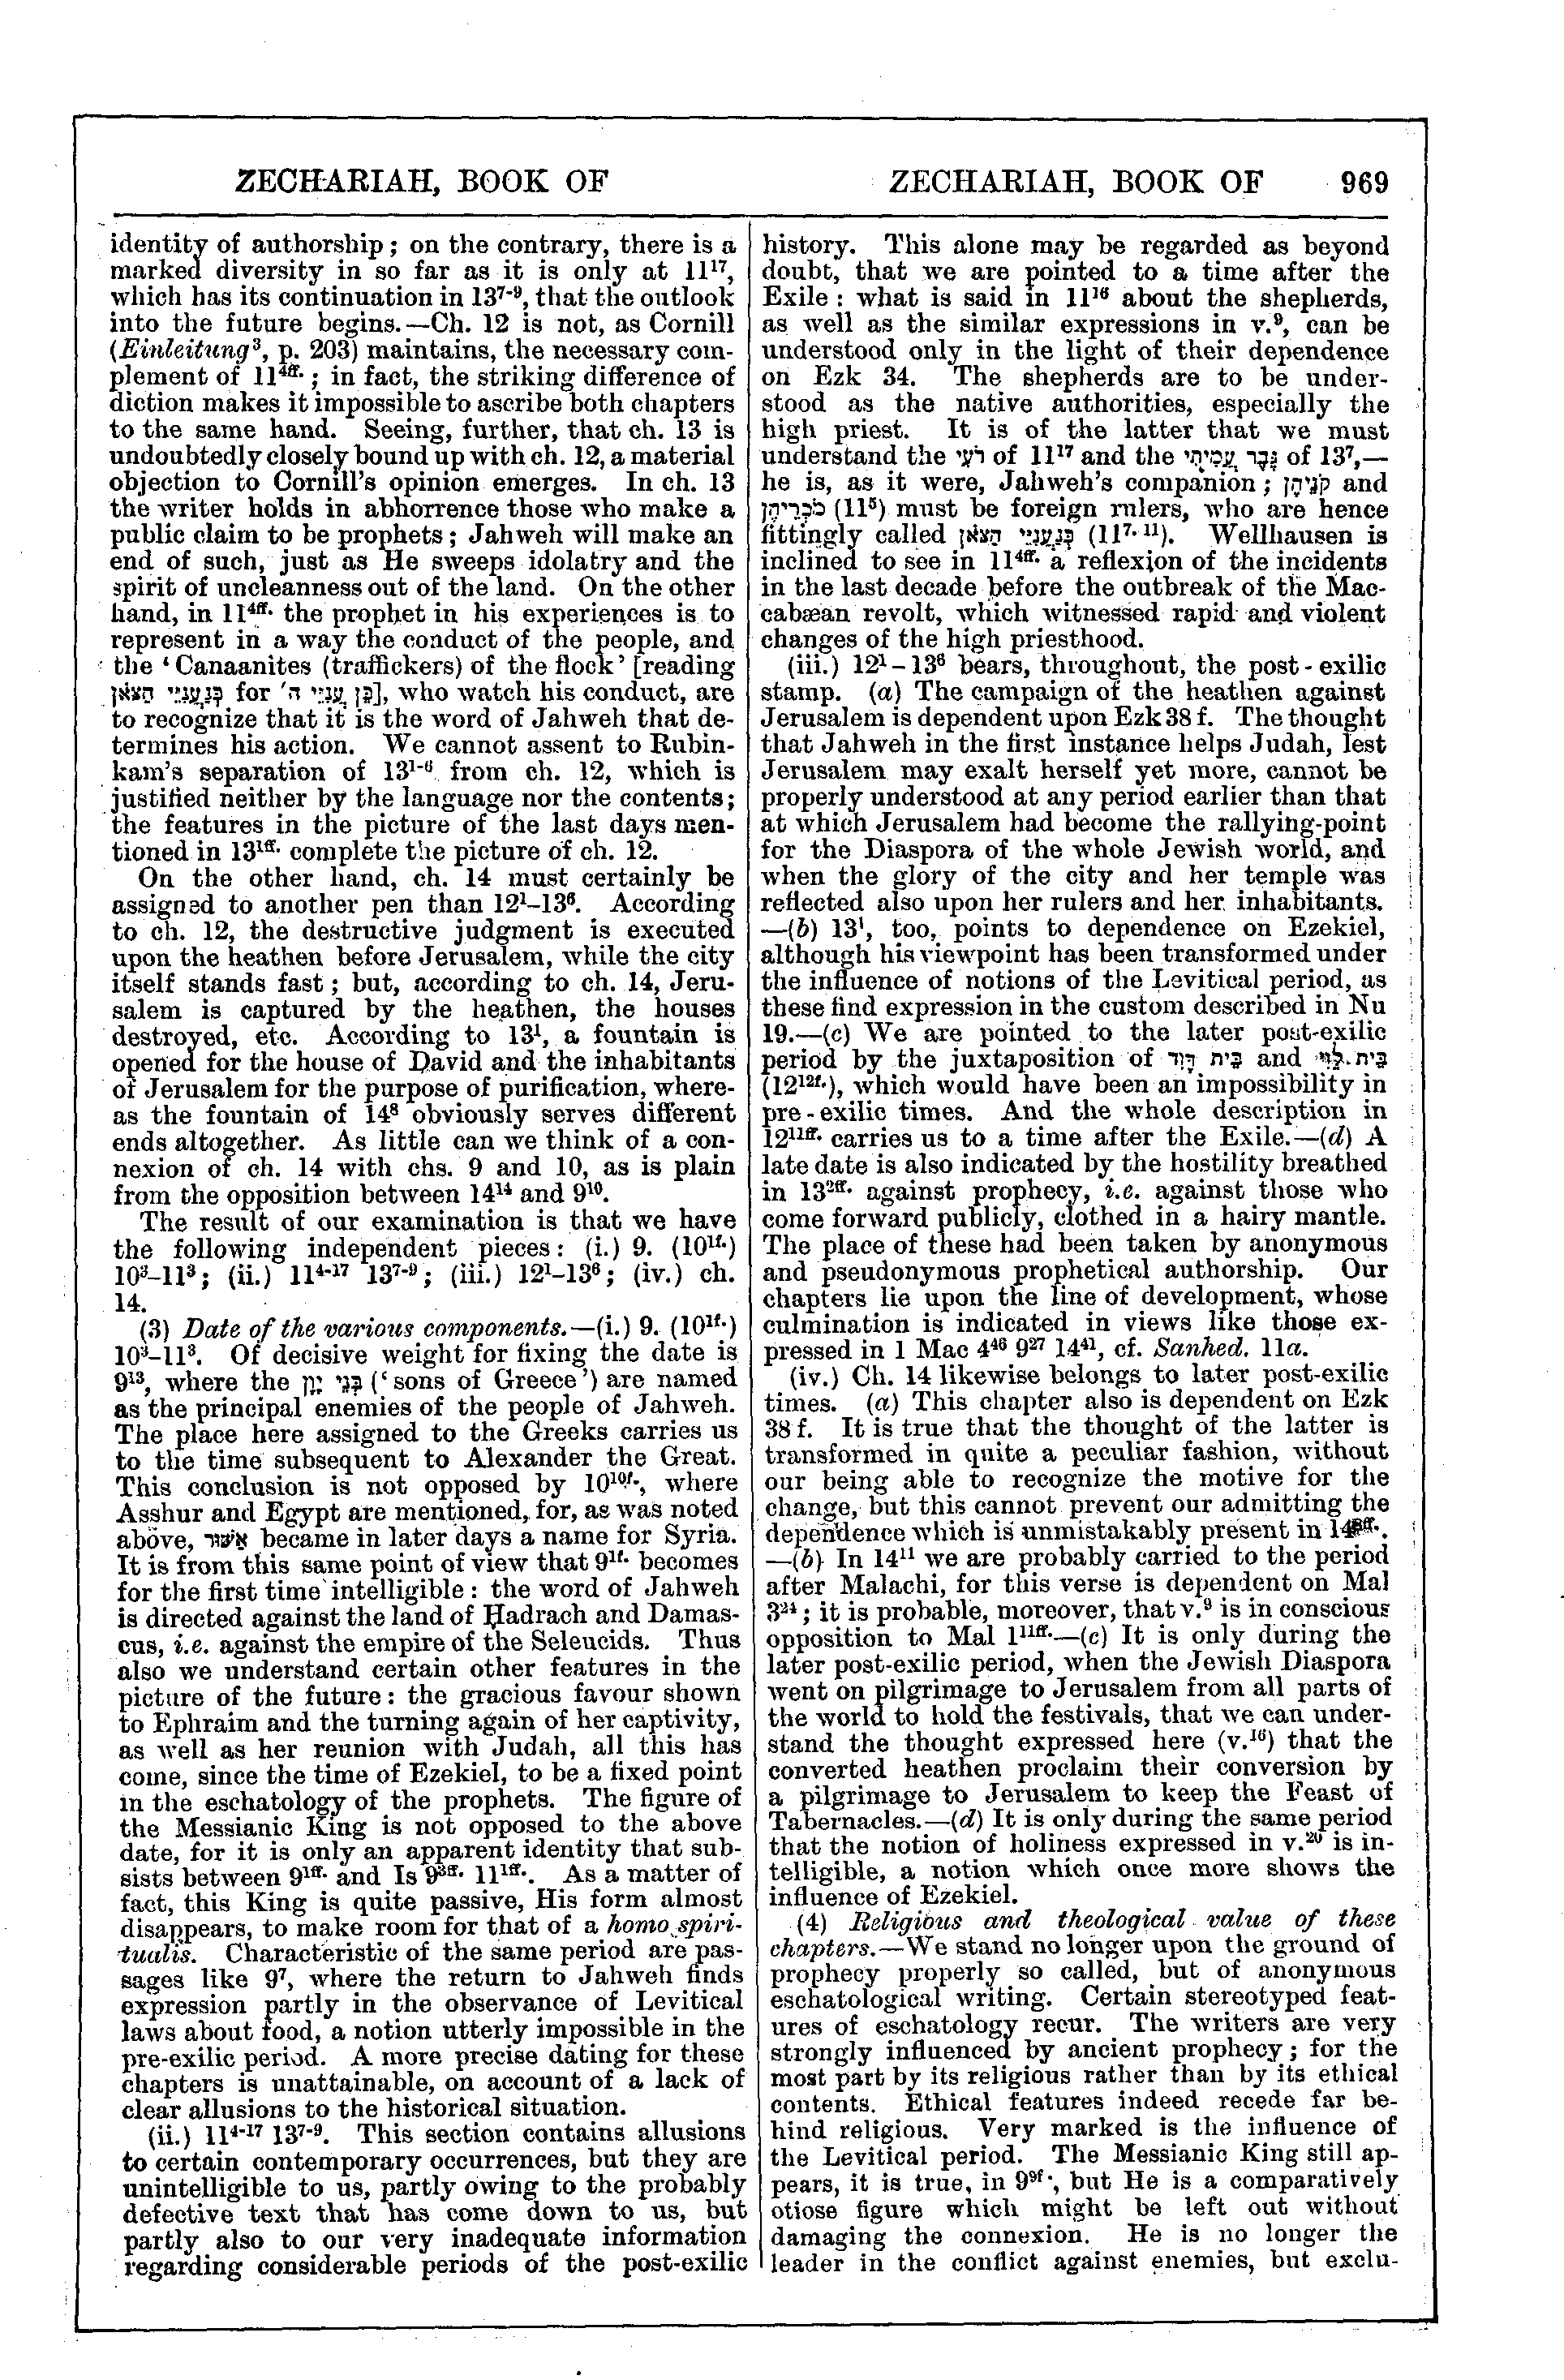 Image of page 969